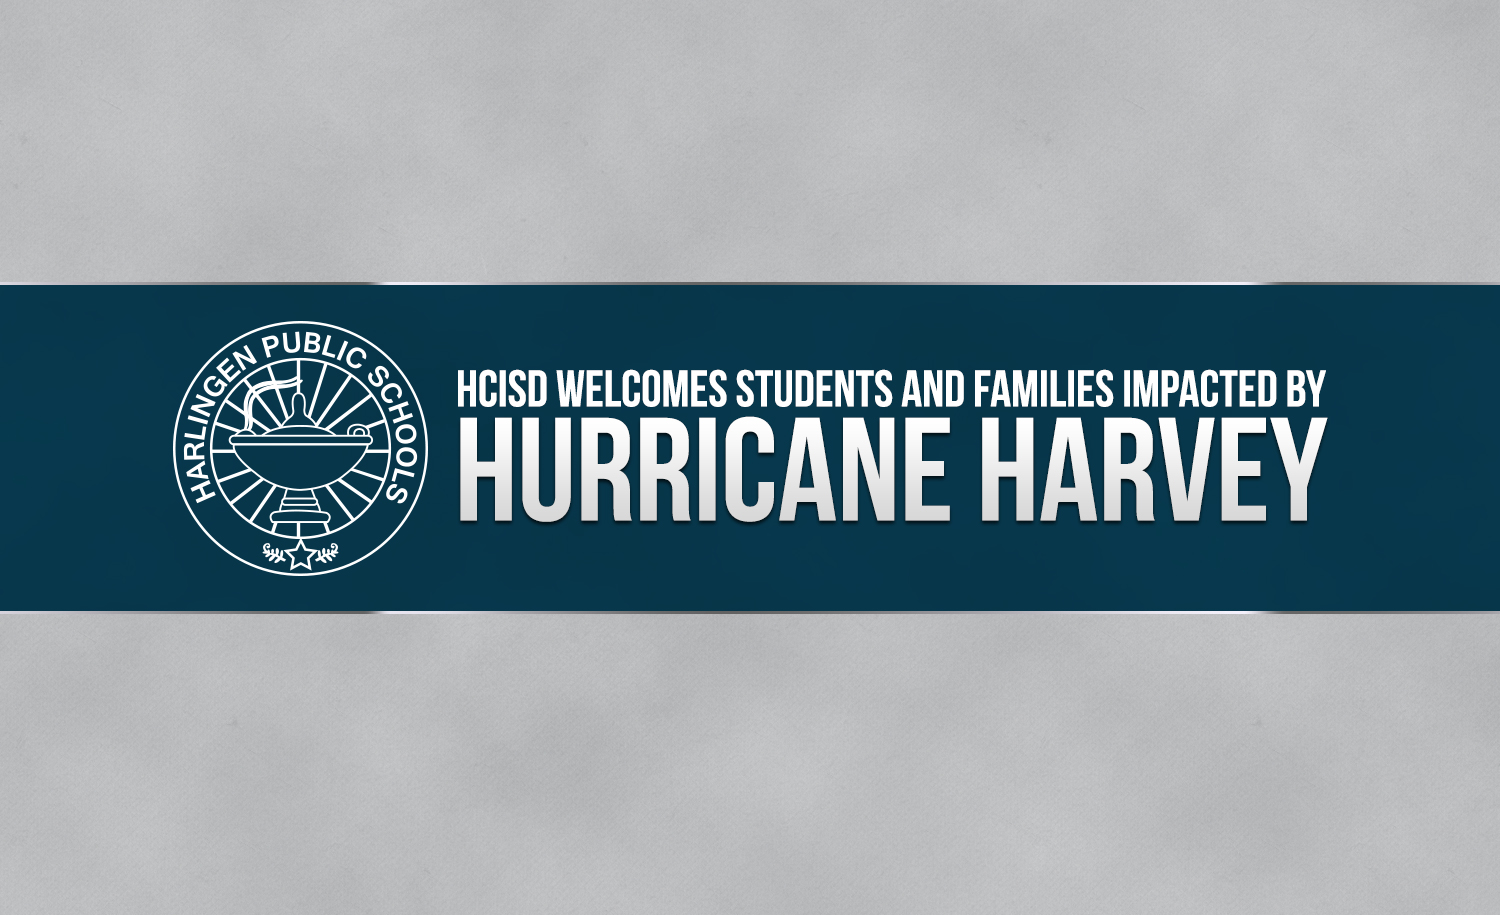 HCISD welcomes students and families impacted by Hurricane Harvey